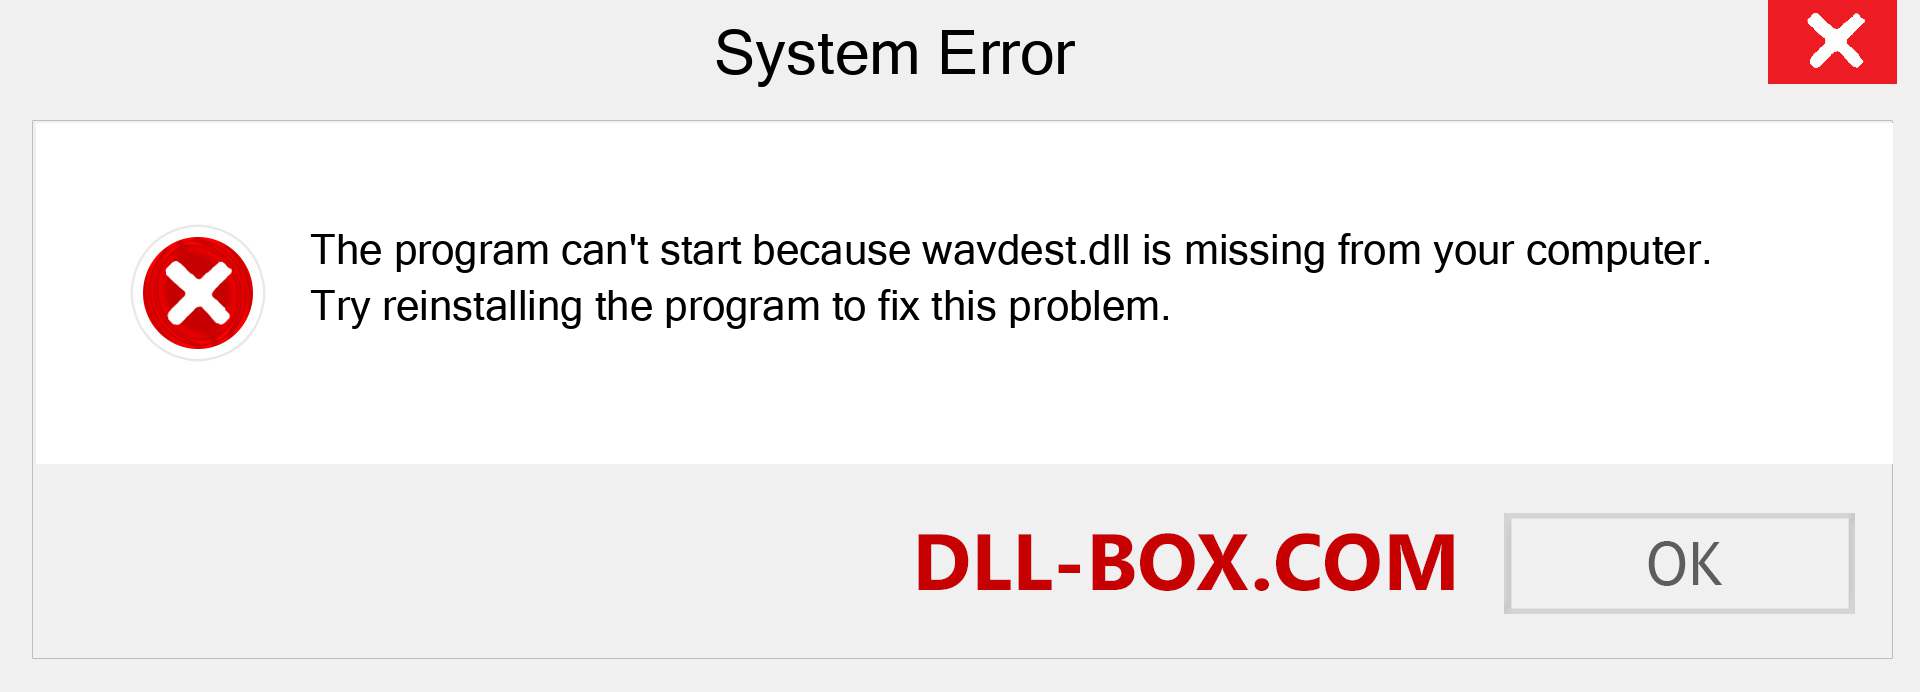  wavdest.dll file is missing?. Download for Windows 7, 8, 10 - Fix  wavdest dll Missing Error on Windows, photos, images